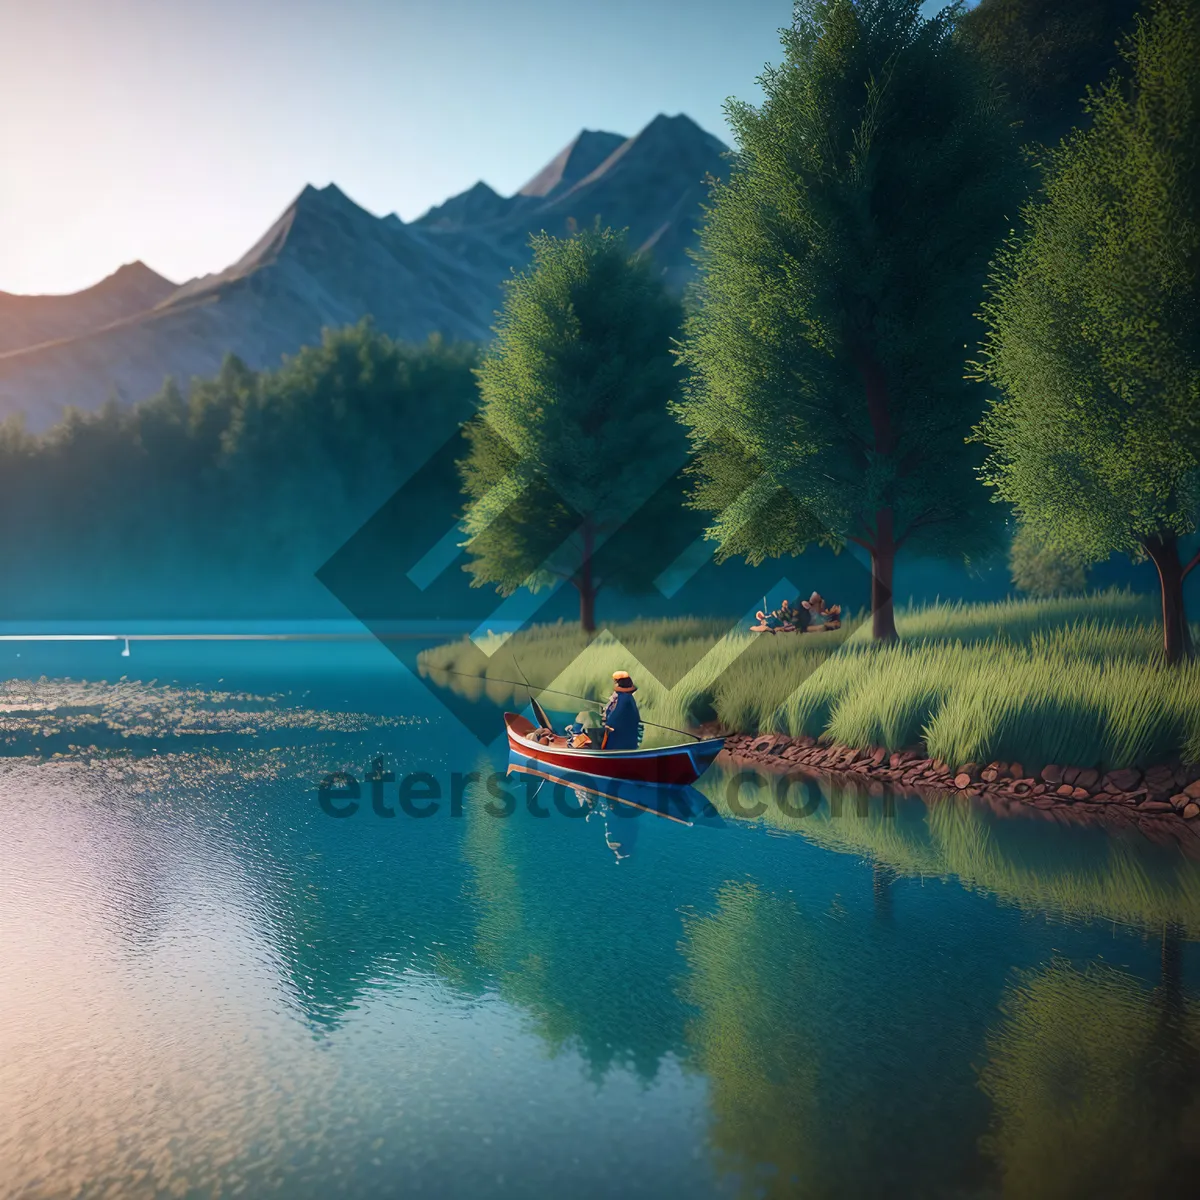 Picture of Serene Summer Lakeside Reflection among Majestic Mountains